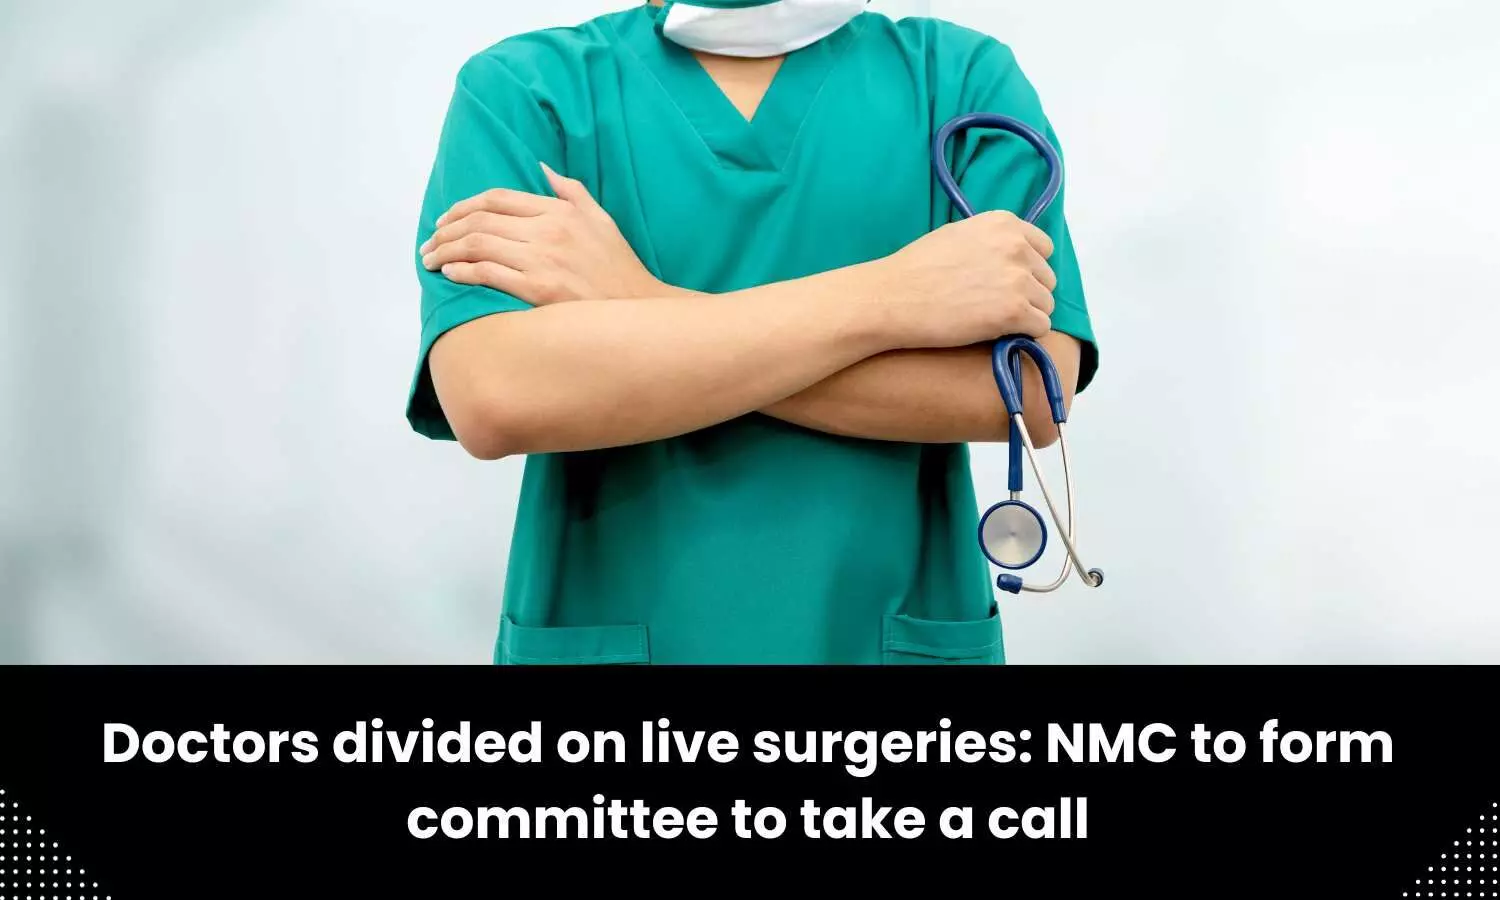 Doctors divided on live surgeries: NMC to form committee to take a call